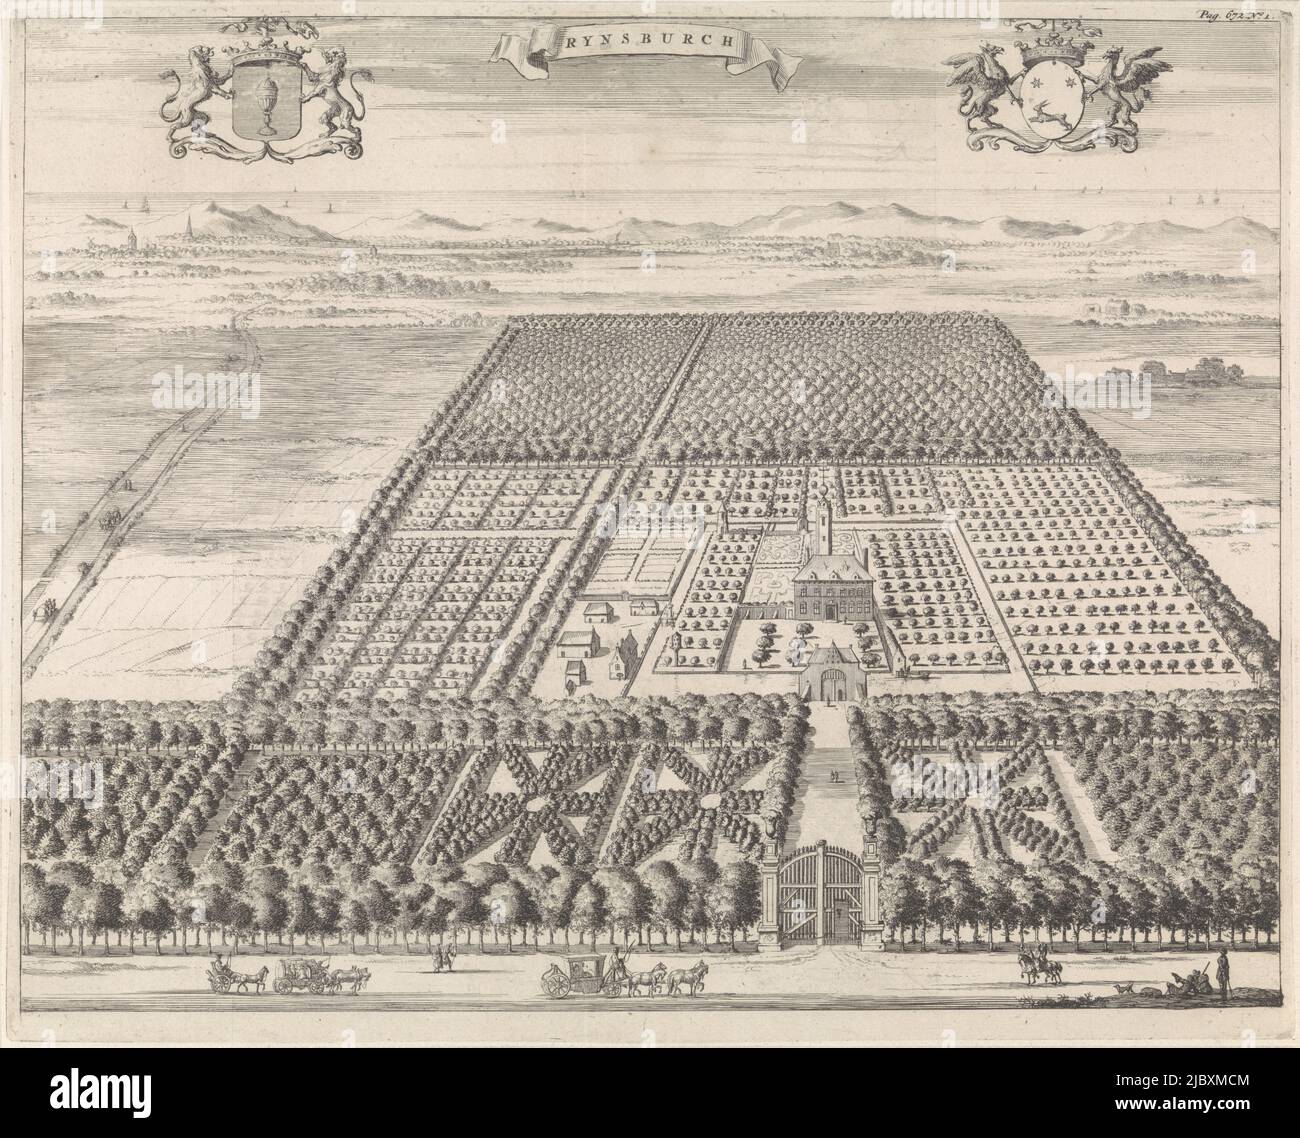 Bird's eye view of the Rijnsburg country house near Oostkapelle. To the right of center is the country house surrounded by gardens and orchards. In the background the dunes and sea. Top left the coat of arms of owner Jacob Godin, in the center a banderole with the title, top right the coat of arms of his wife Catharina de Haze. Marked at top right: Pag. 672. No. 1, View of the country house Rijnsburg Rynsburch , print maker: Jan Luyken, publisher: Johannes Meertens, (possibly), publisher: Abraham van Someren, (possibly), print maker: Amsterdam, publisher: Middelburg, publisher: Amsterdam, 1696 Stock Photo